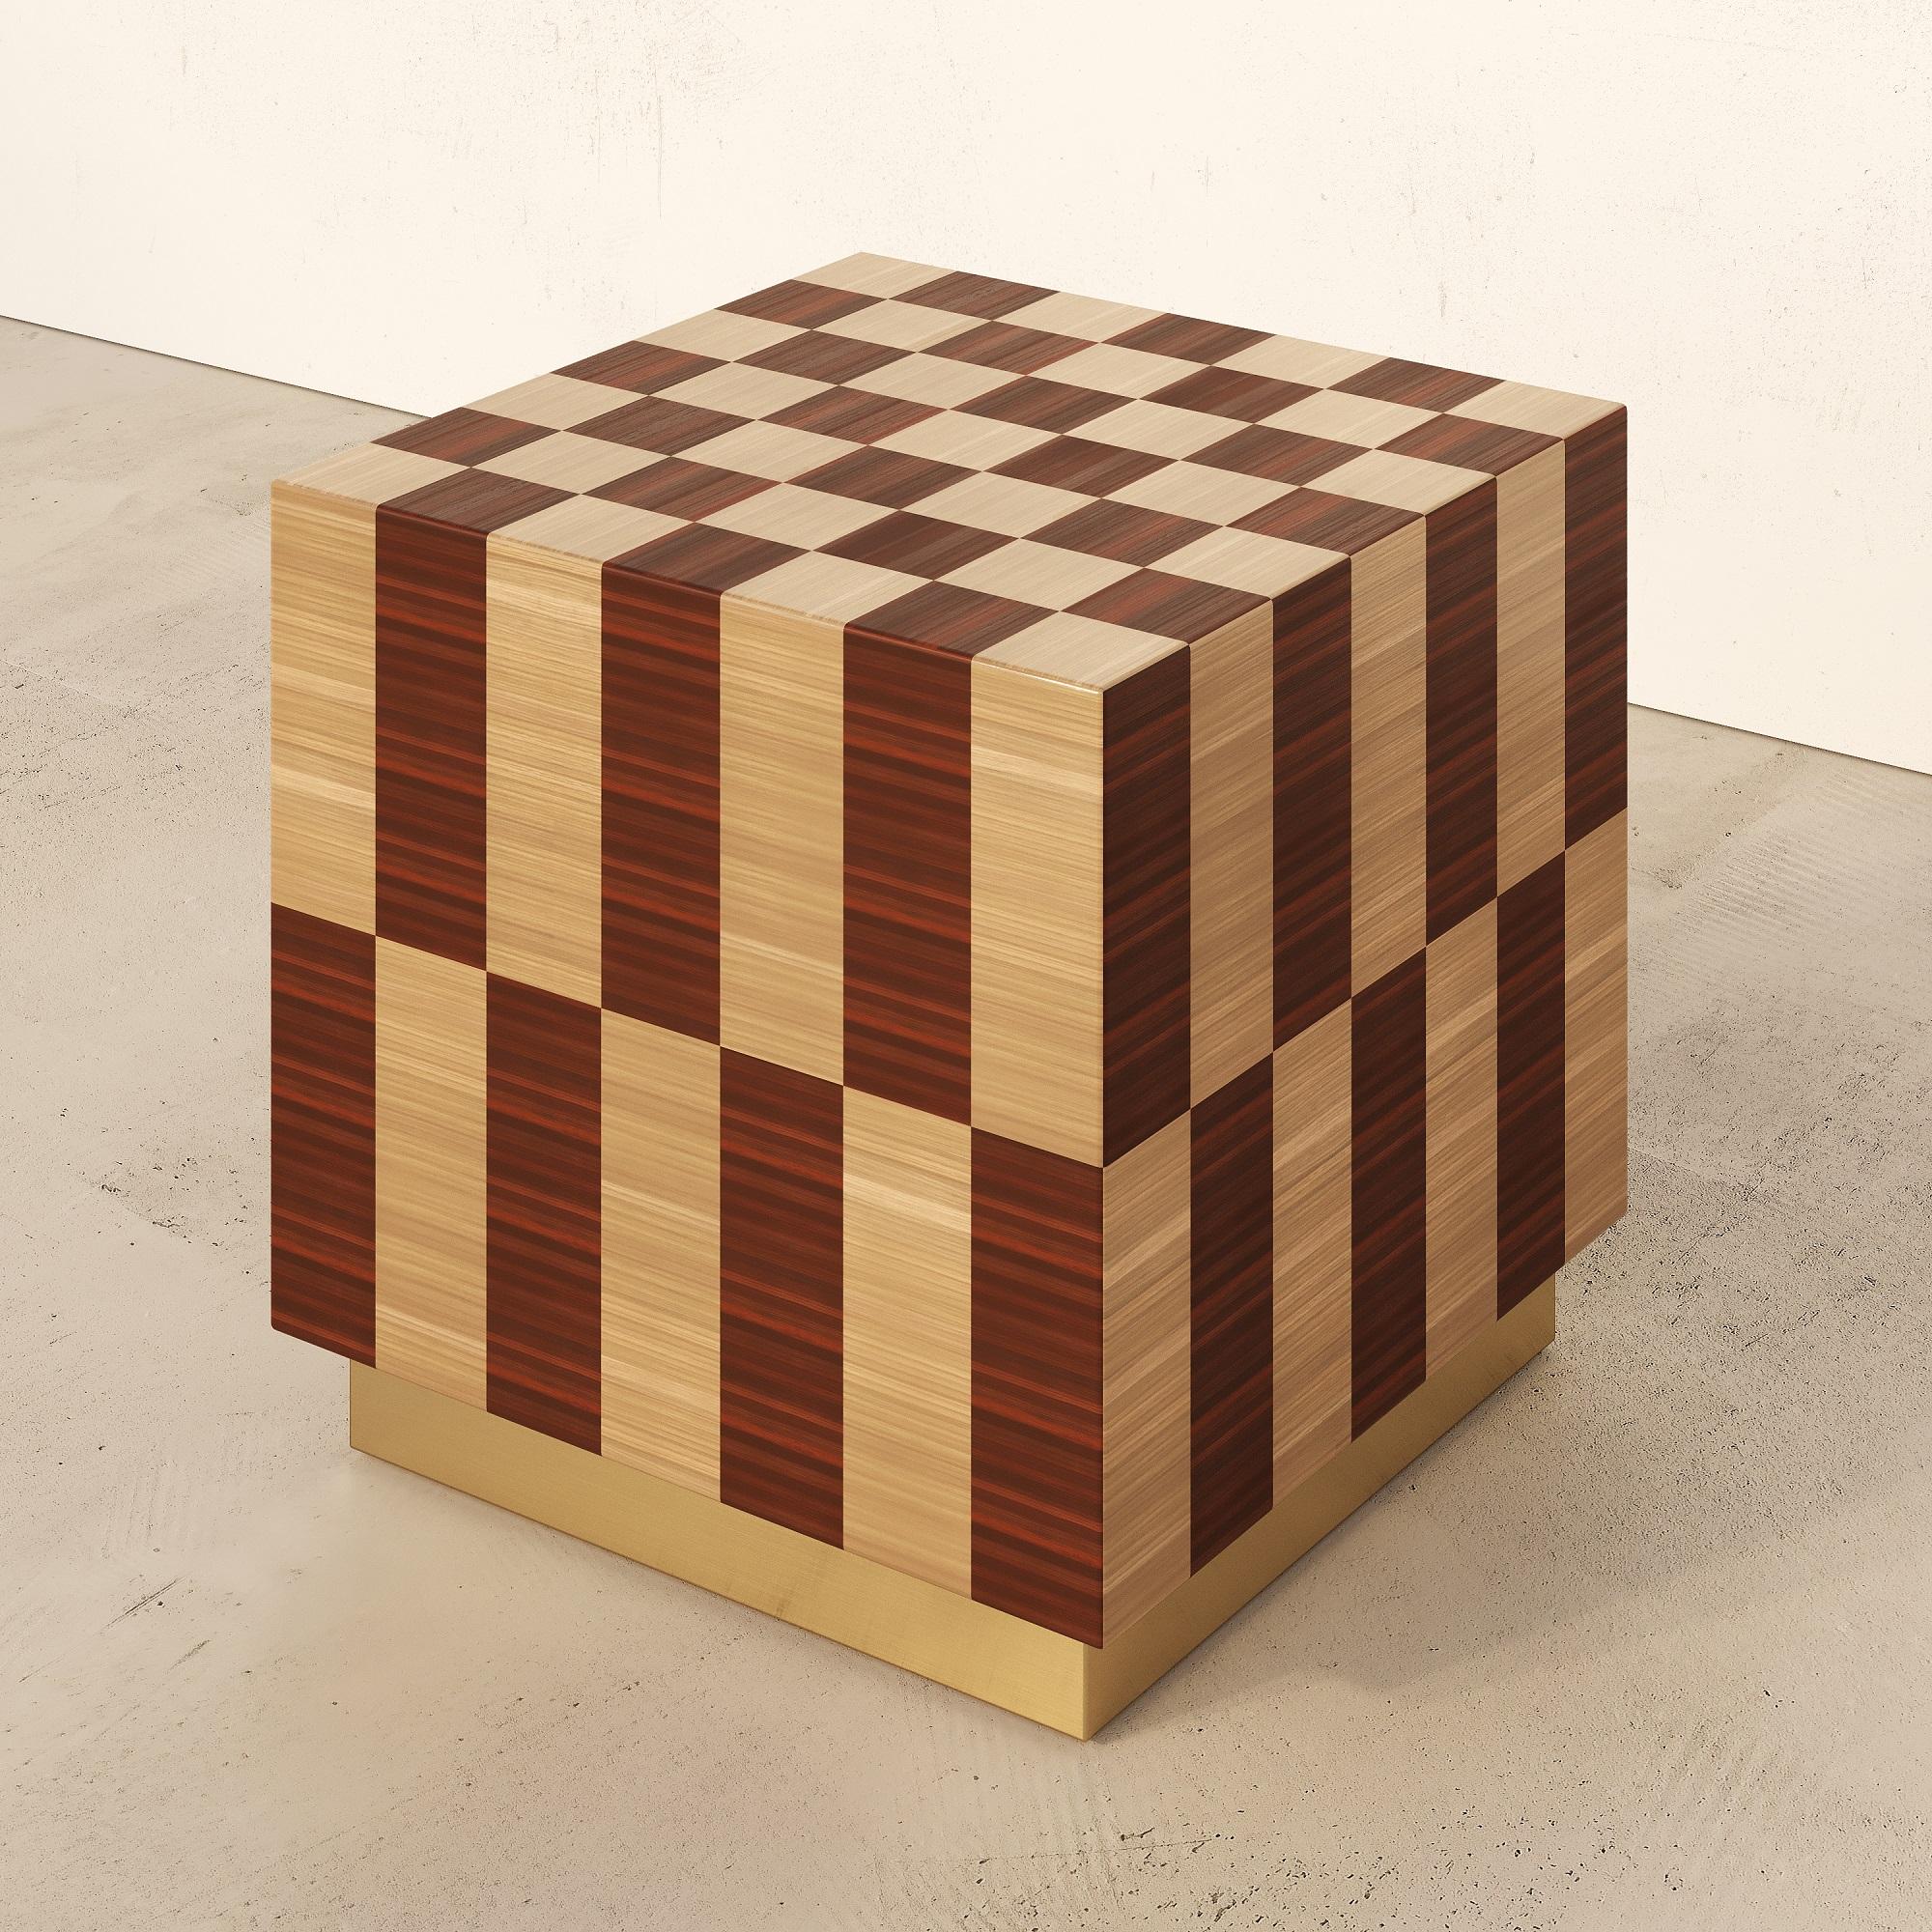 BLOCK SIDE TABLE in straw marquetry technique

Inlay scheme: Checkerboard
Colour scheme: Black Ruta
MATERIALS: MDF, painted rye straw, wax
DIMENSIONS (cm): 40x40x45.
Dimensions and colours are customizable
Packaging dimensions (cm): 50 x 50 x